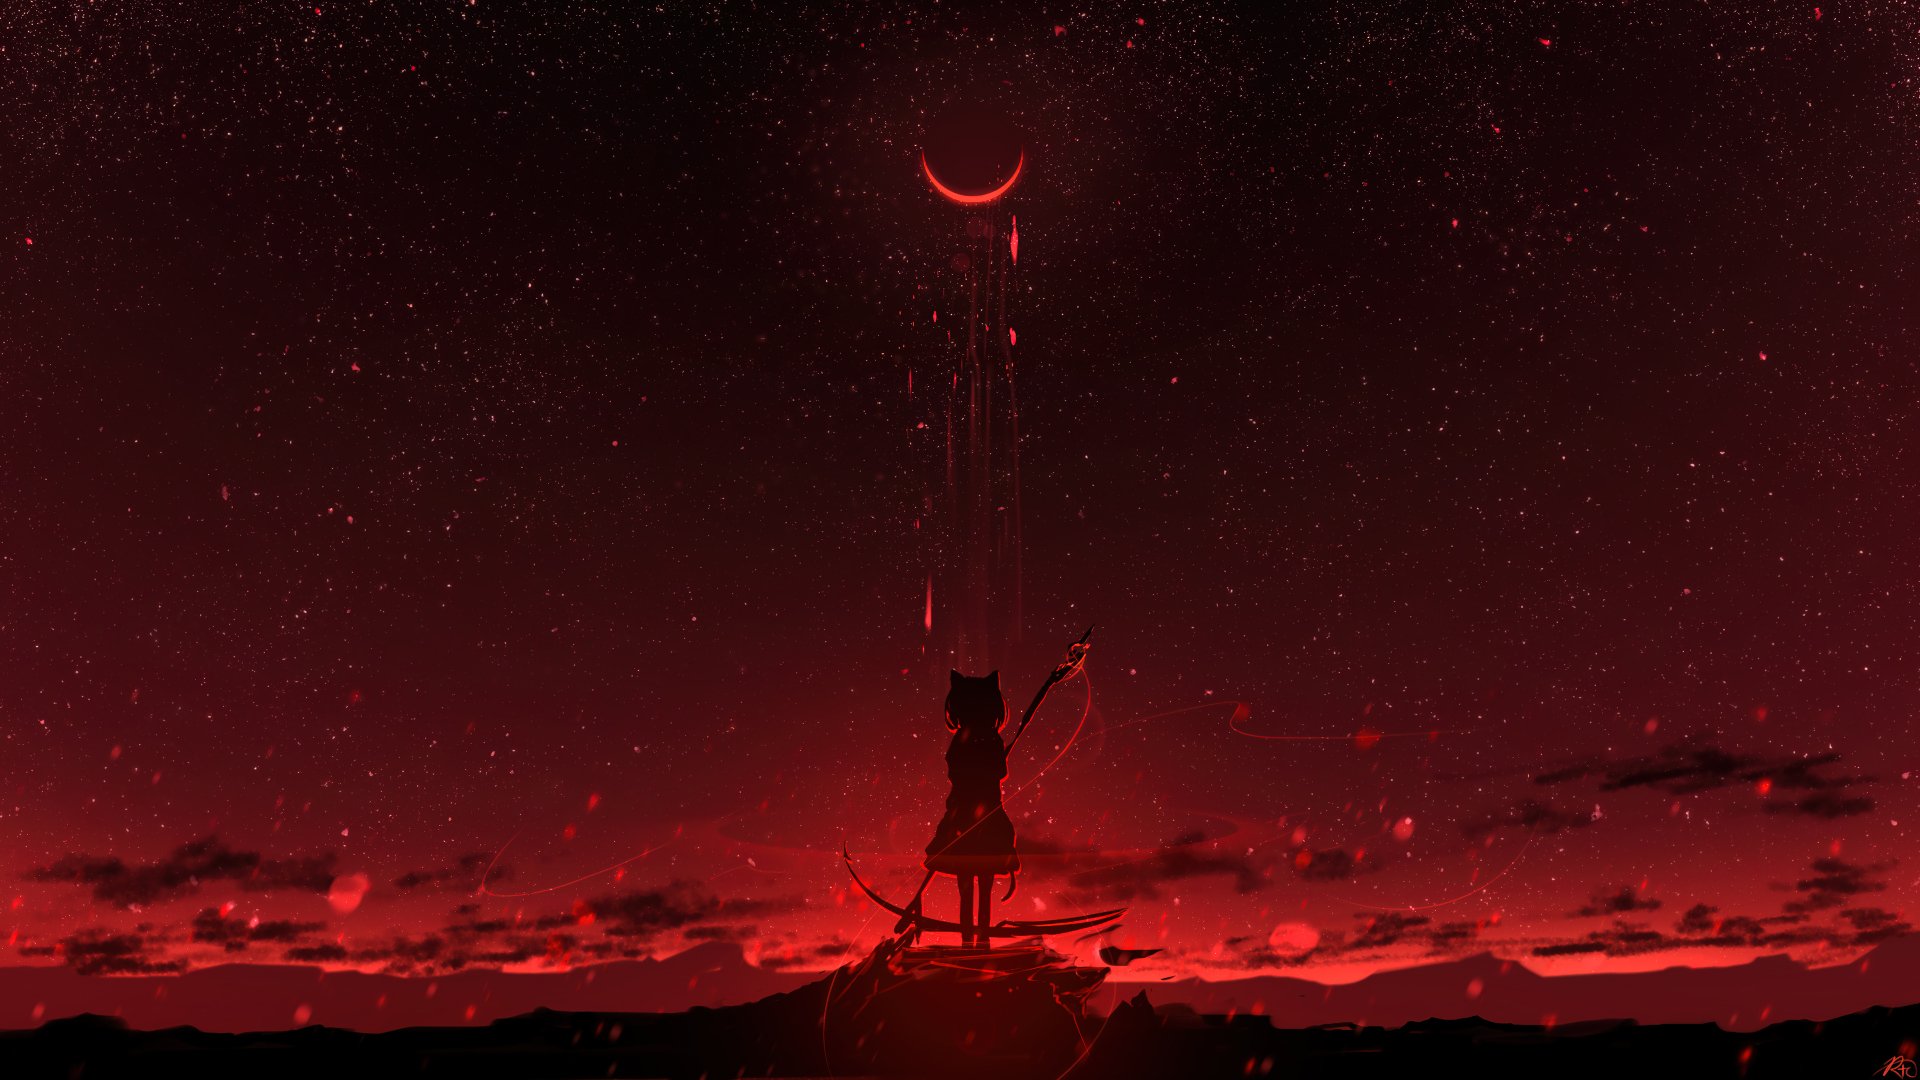 A striking anime girl under a blood moon - a cool and captivating HD desktop wallpaper and background.